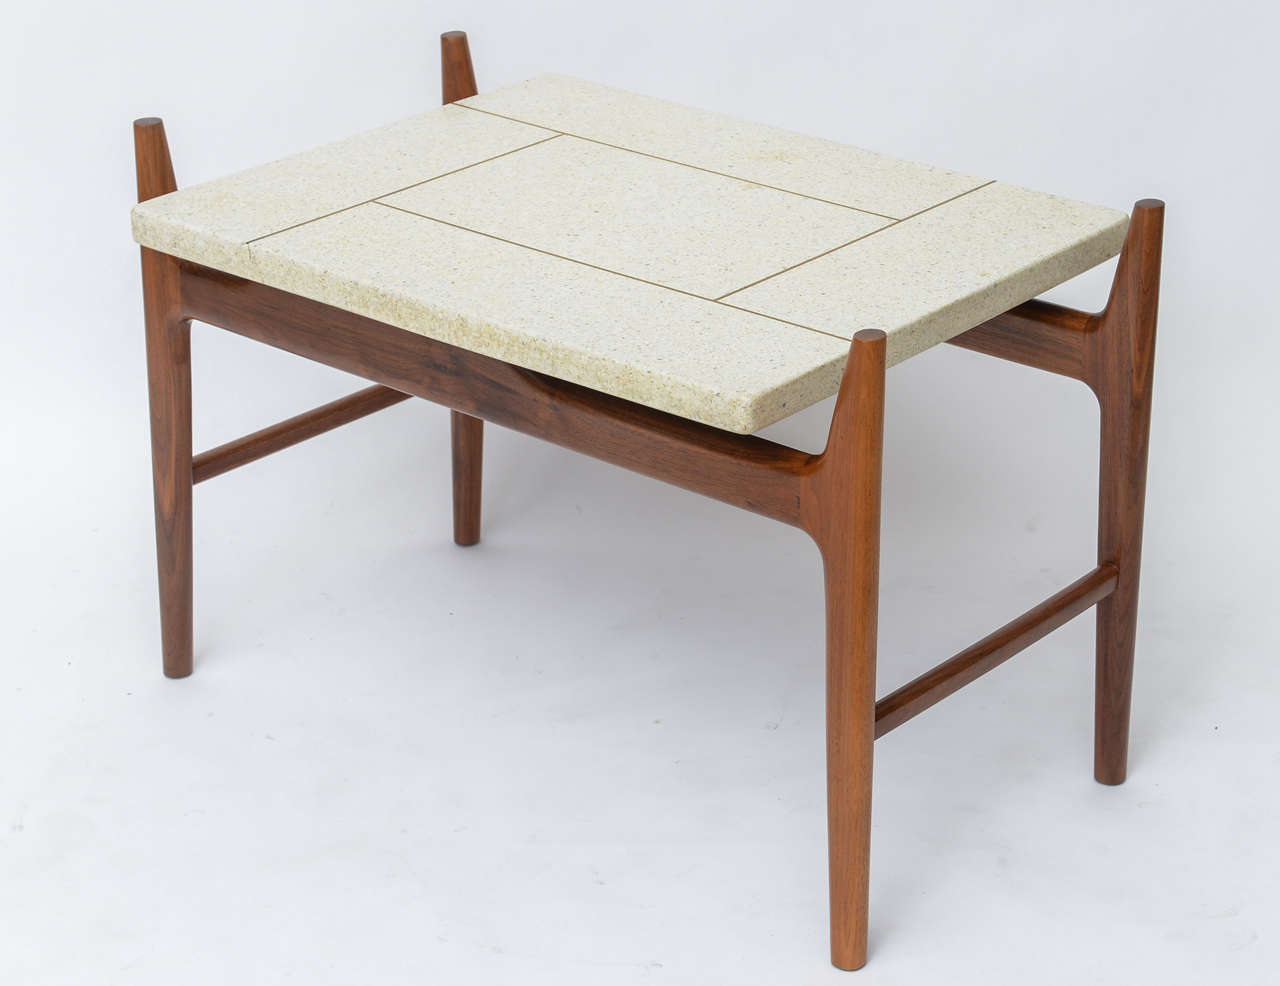 Nicely-scaled piece by Harvey Probber can serve as a generous end table or a European height coffee table. Rosewood base supports a brass inlaid, terrazzo top in neutral tones of cream and grey.